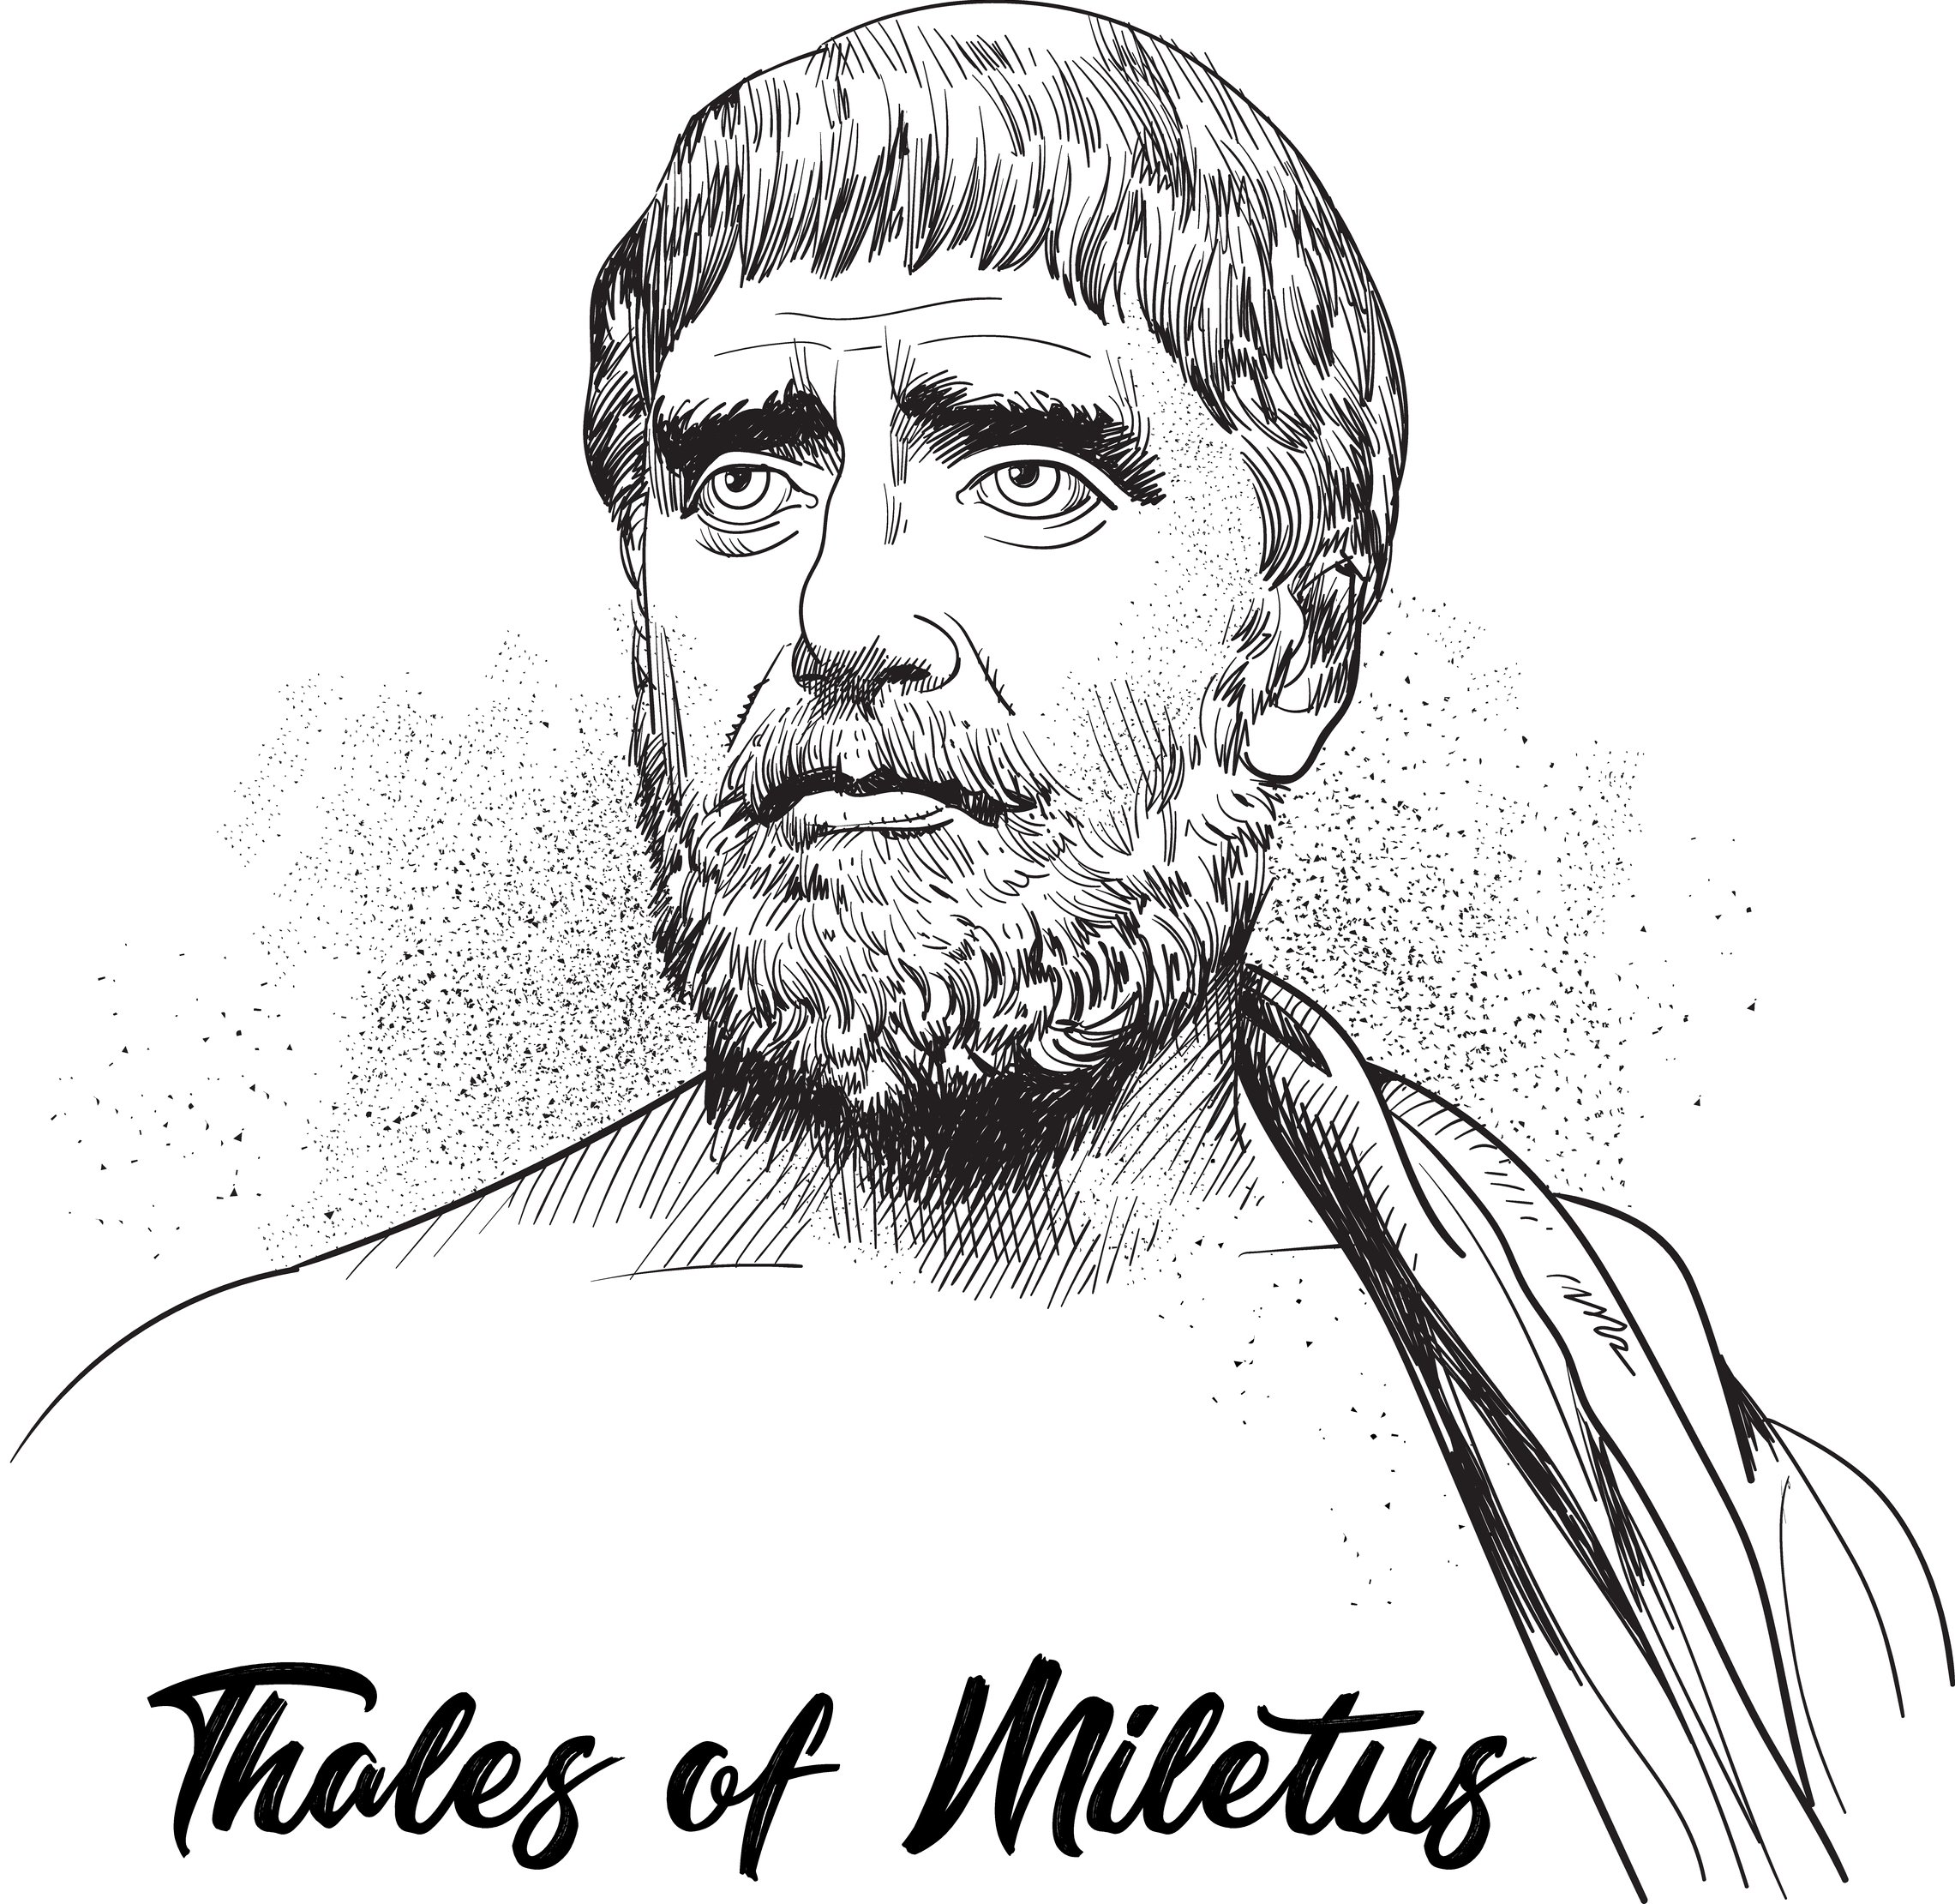 Thalos of Miletus; History and philosophy of the economy, bankruptcy in Minneapolis, MN